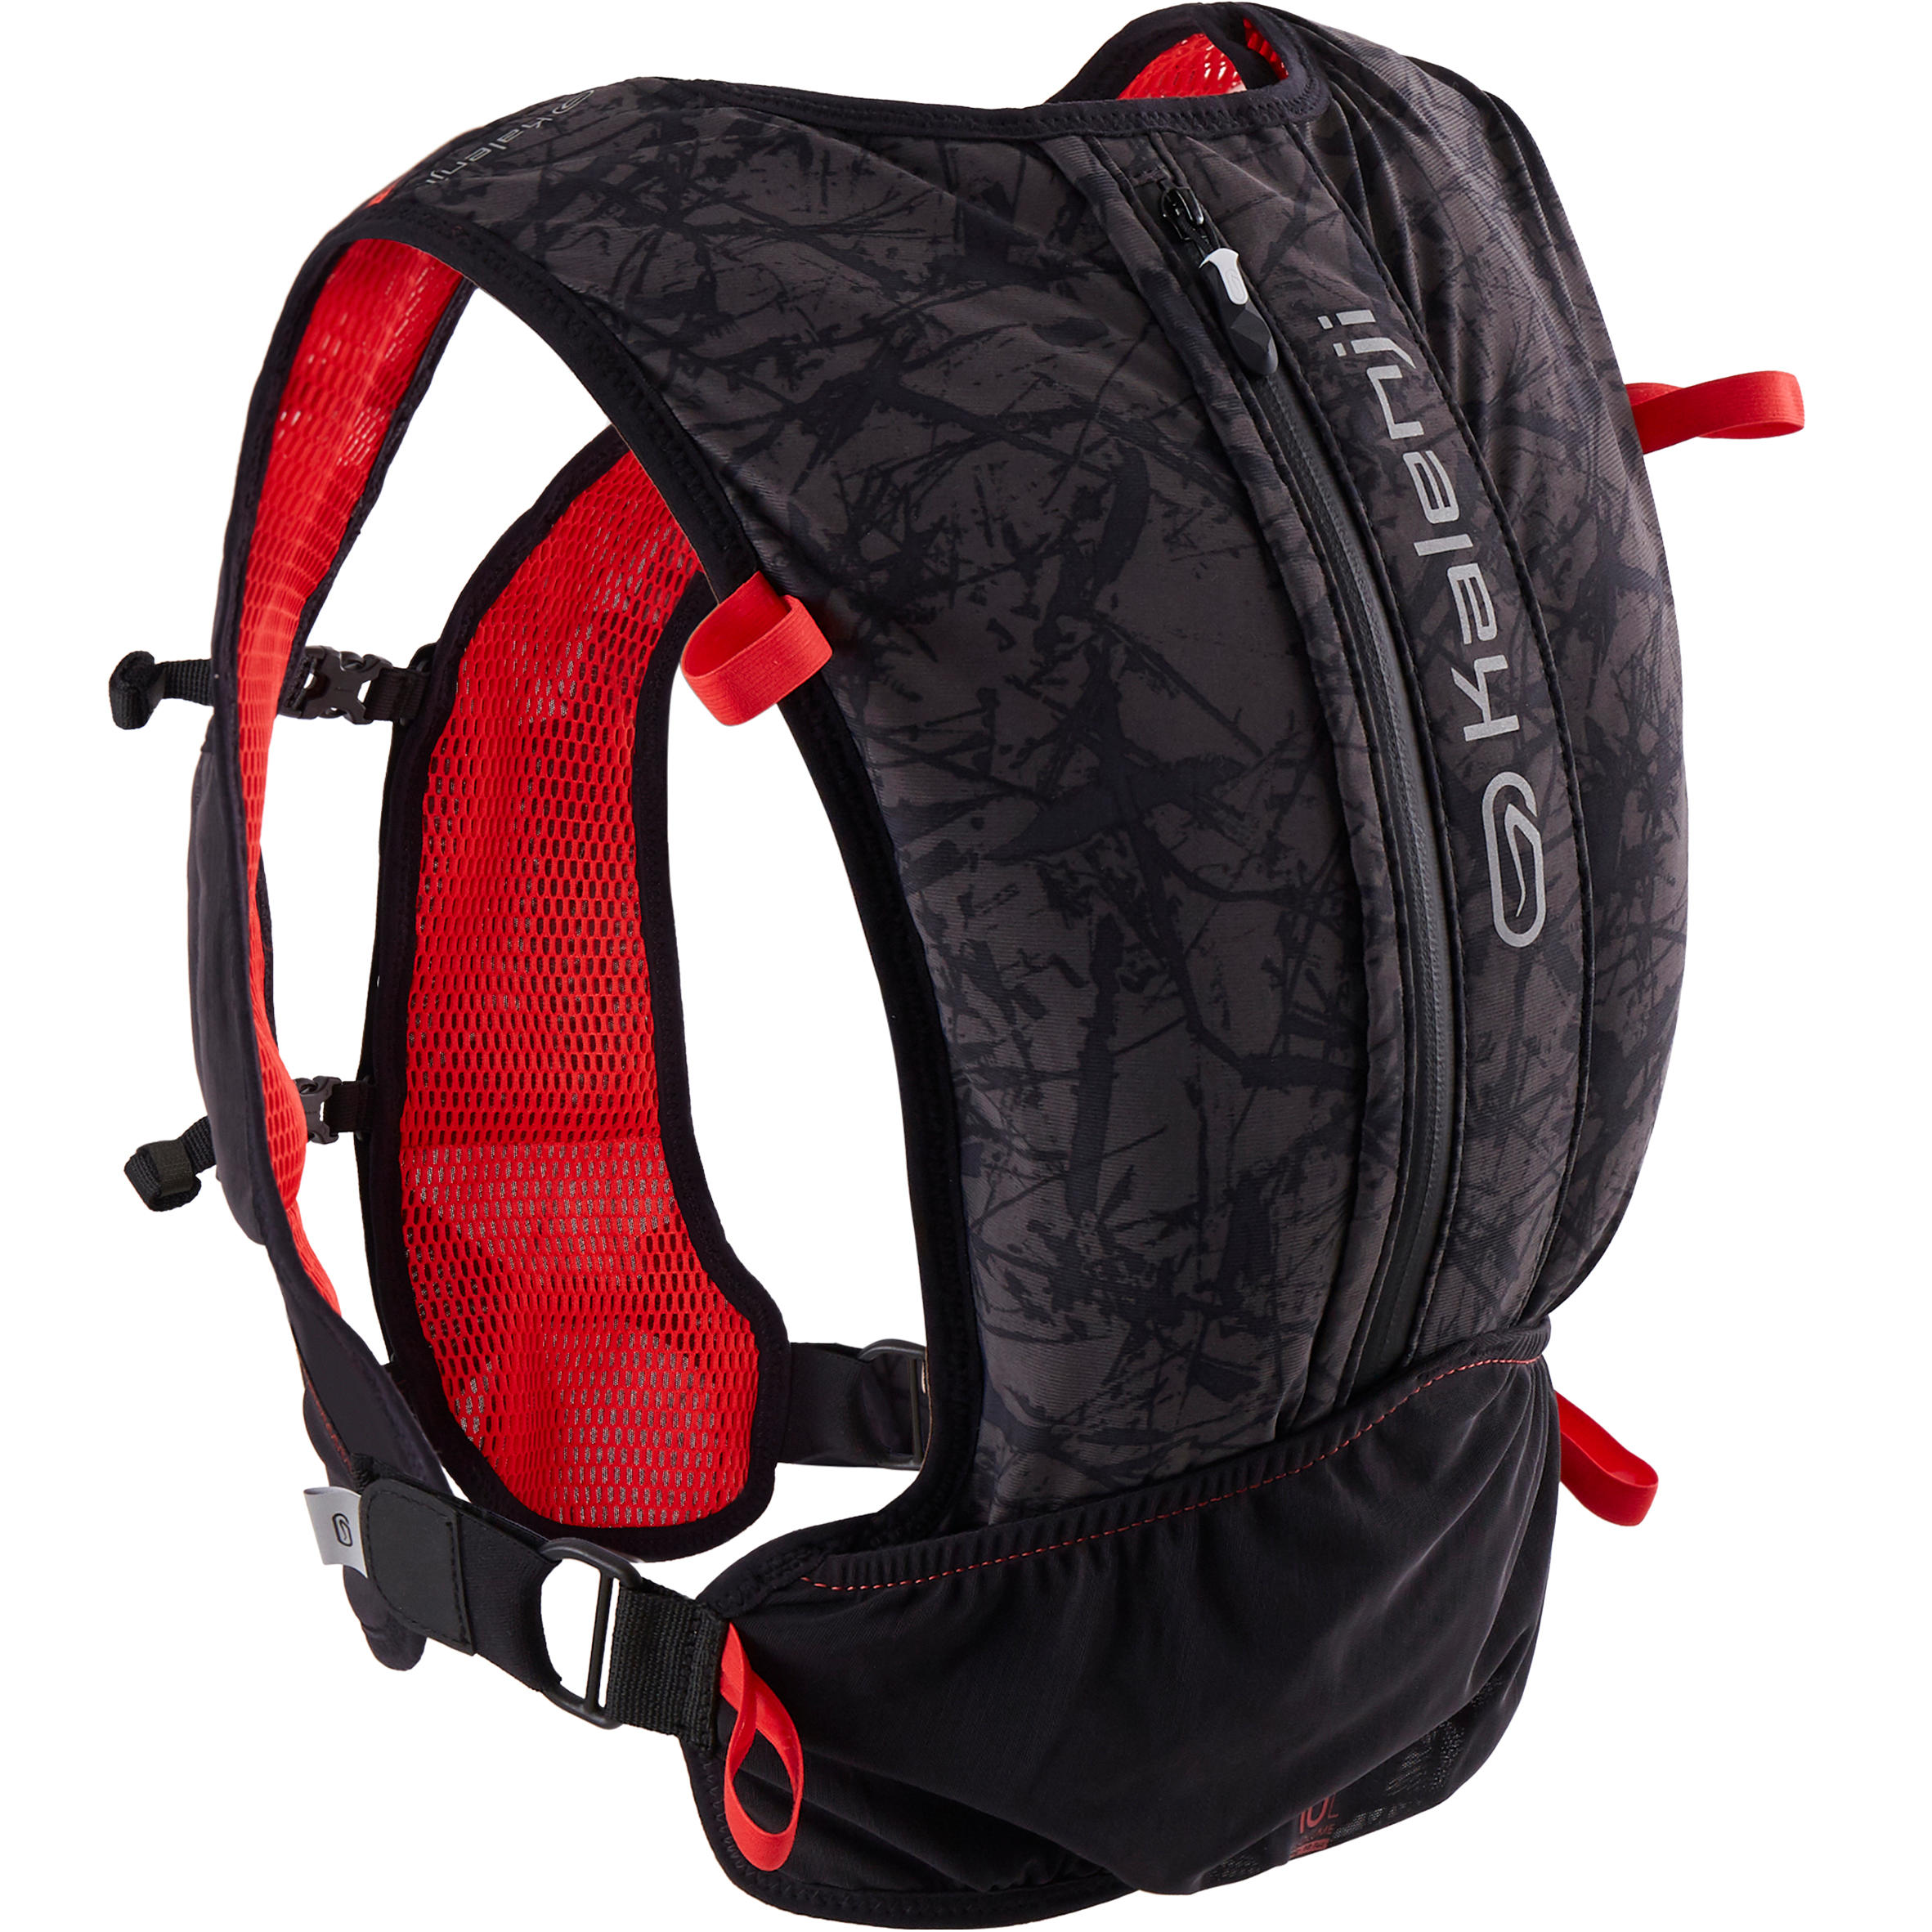 10L TRAIL RUNNING BAG UNISEX BLACK AND RED